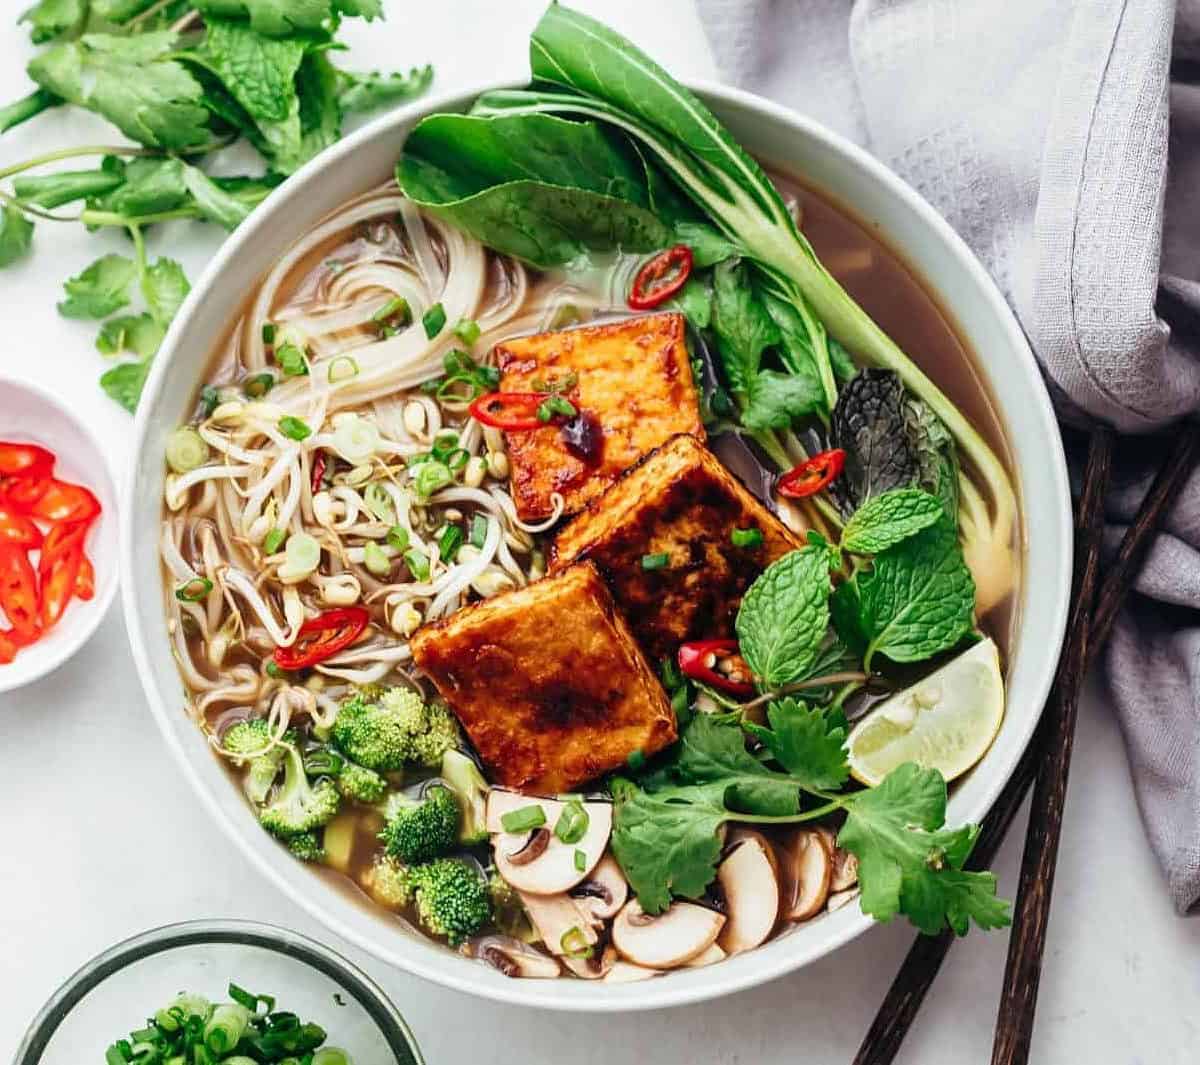  Impress your guests with this Vietnamese broth topped with fresh herbs and veggies.